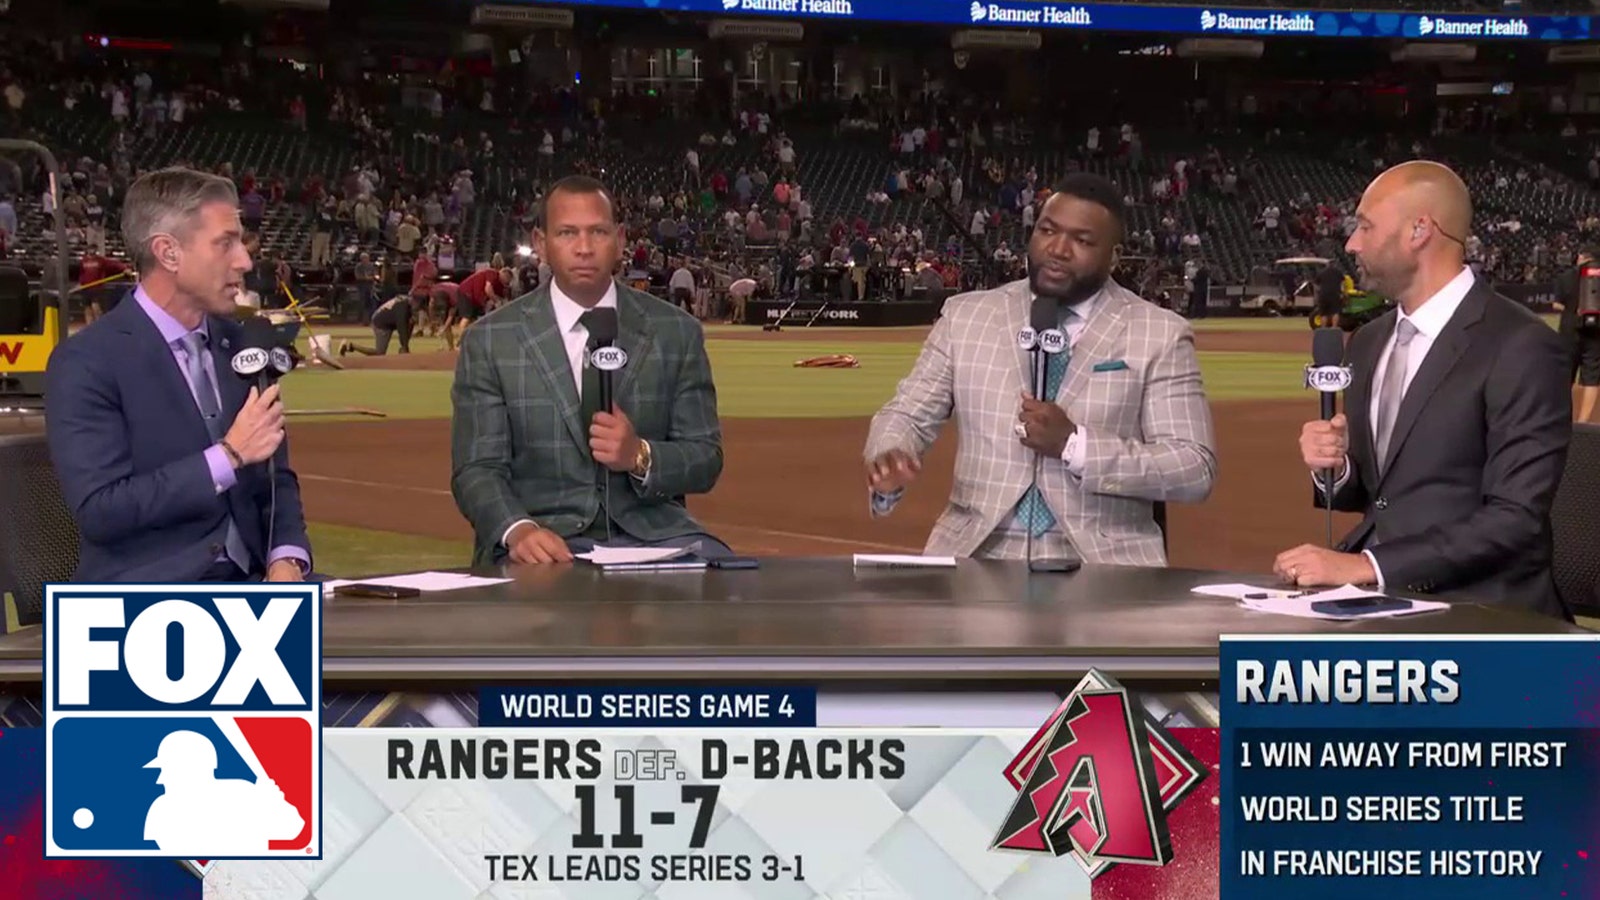 Rangers rout D-backs in Game 4: Jeter, Big Papi & A-Rod react